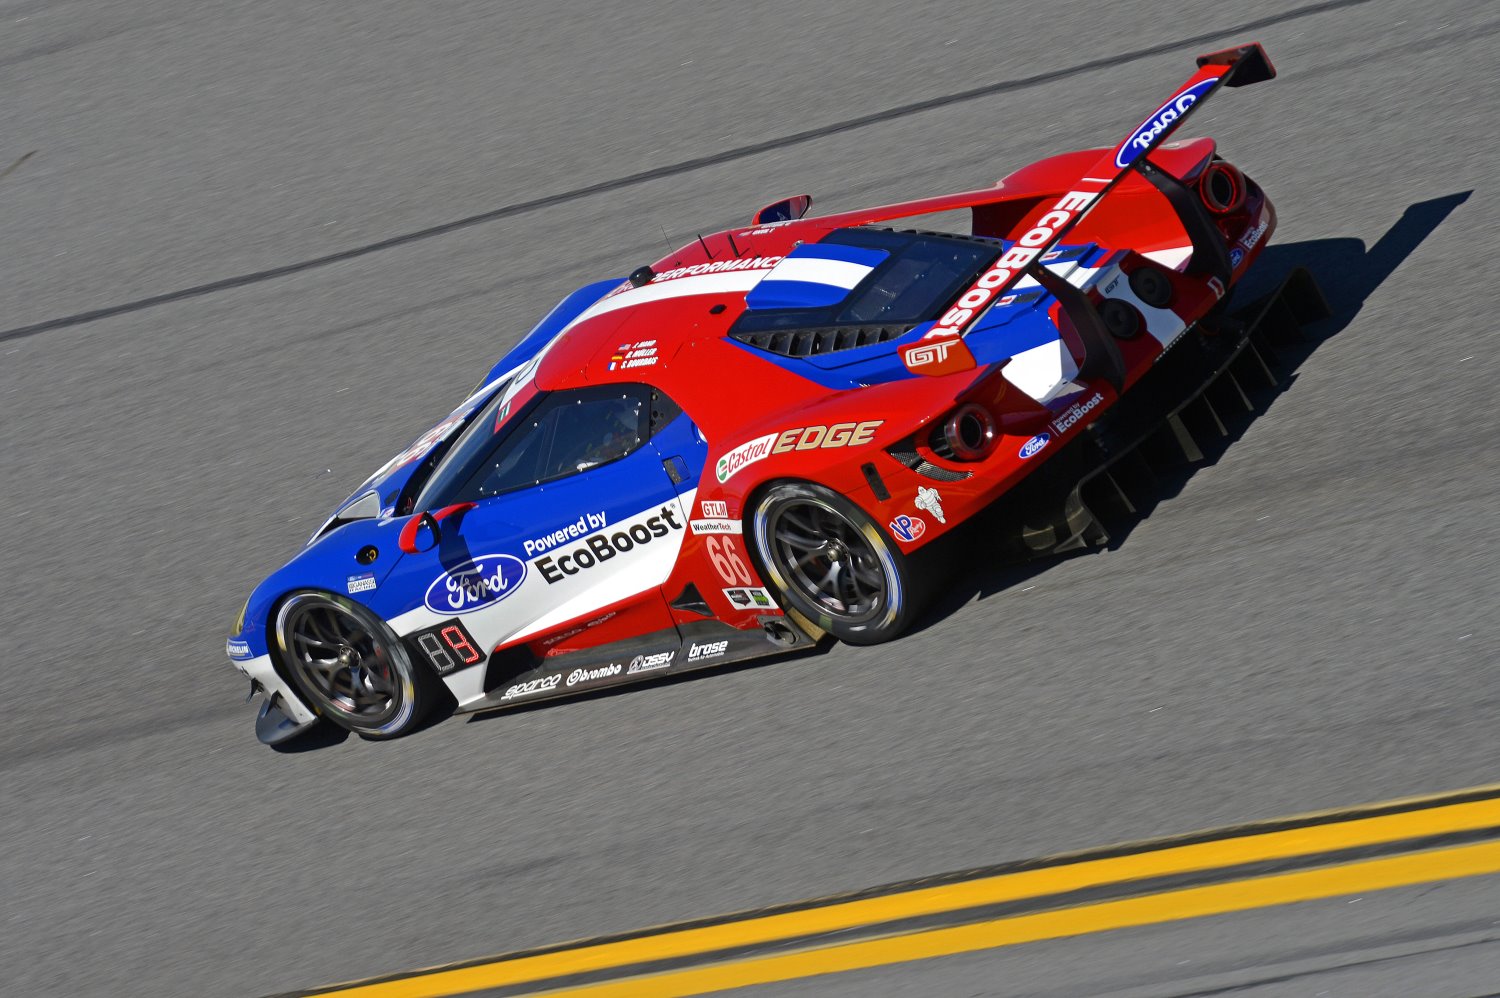 A change in approach has helped the Ganassi Ford GT program to take a step forward